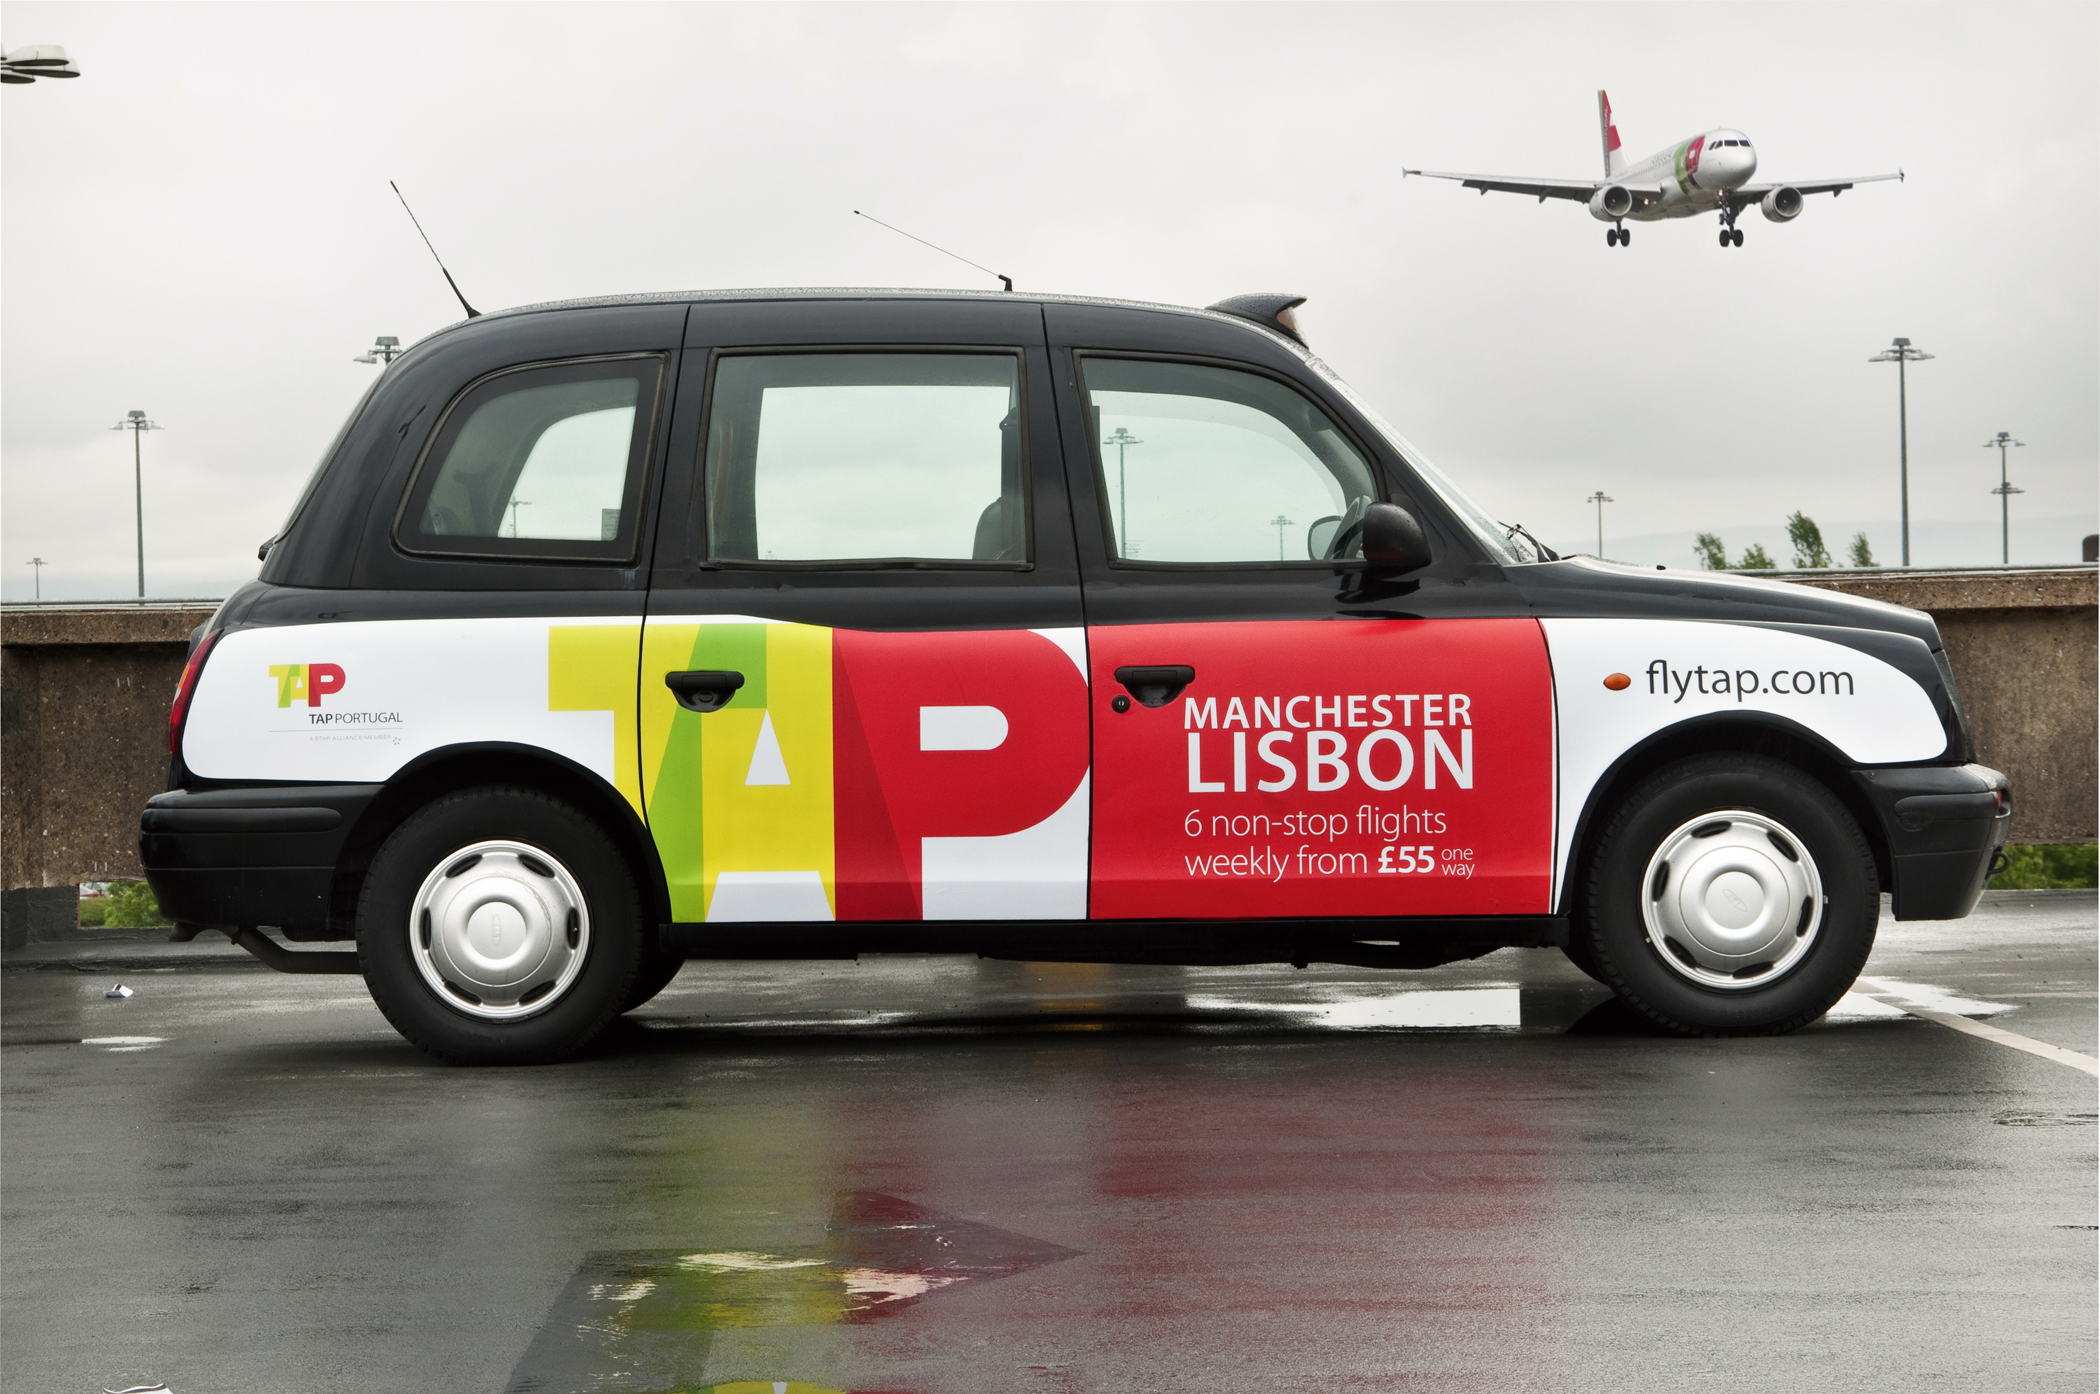 2011 Ubiquitous taxi advertising campaign for TAP  - Manchester Lisbon 6 non-stop flights weekly from £55 one way